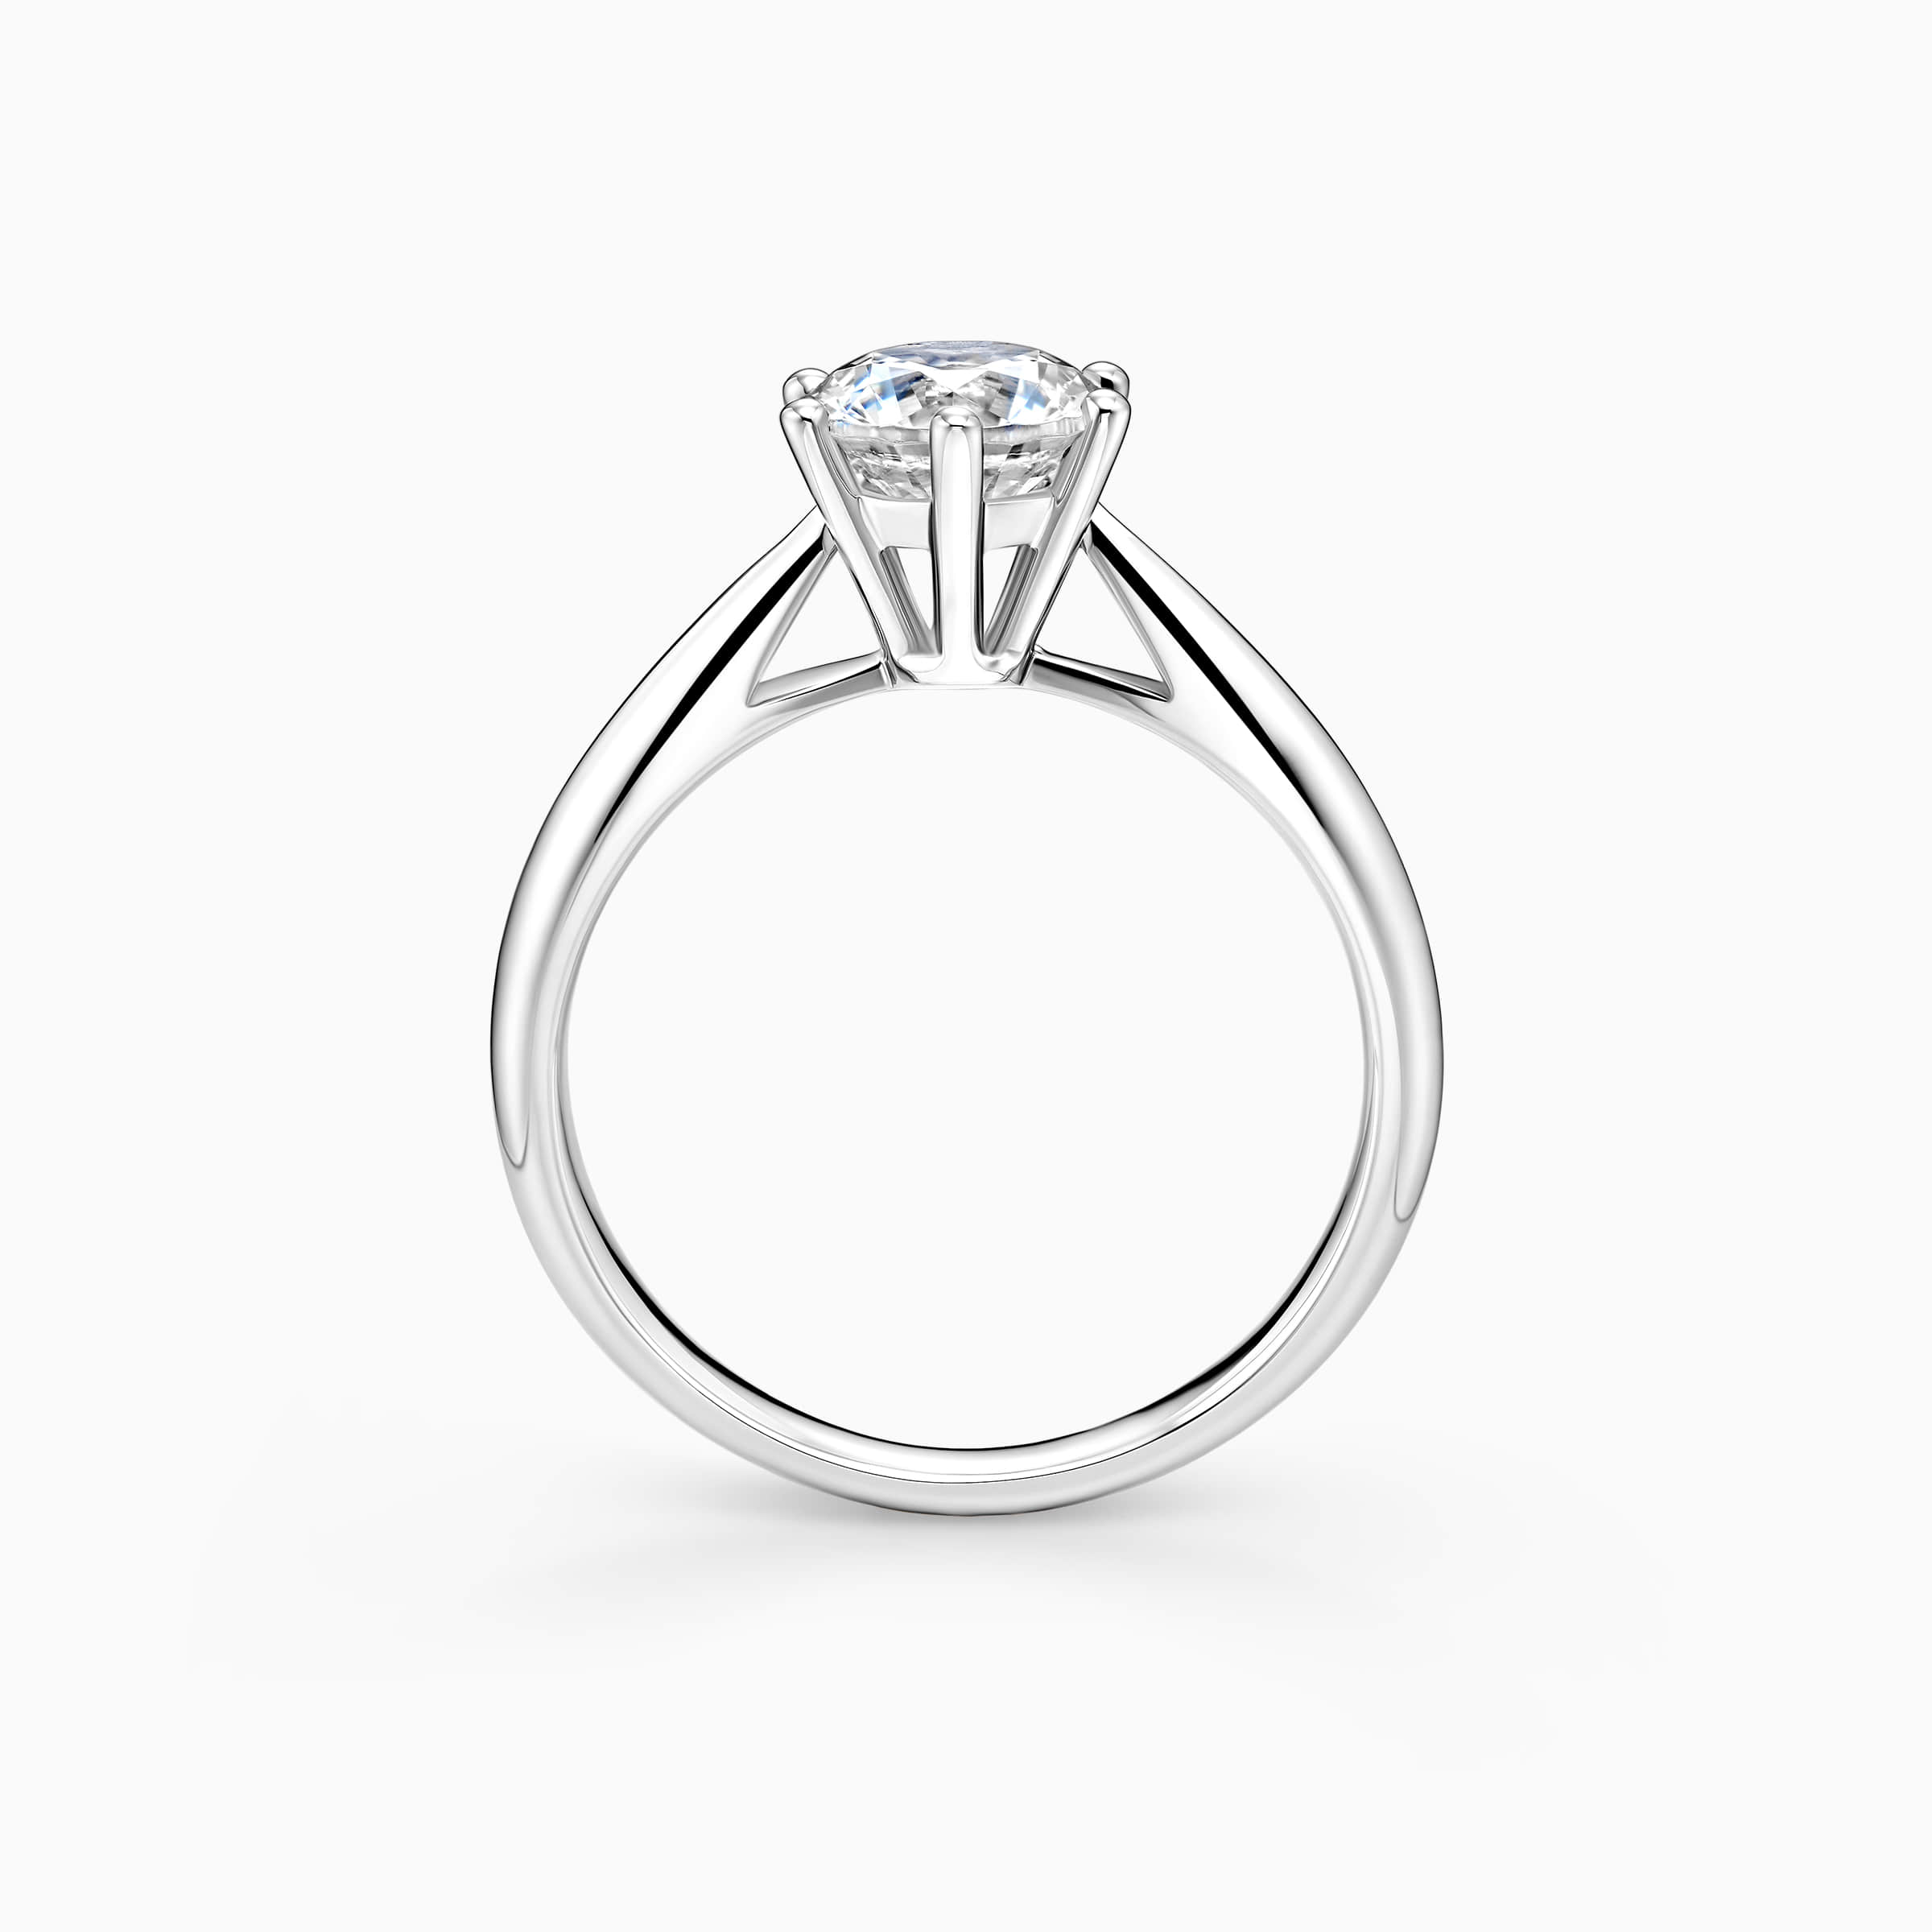 Darry Ring hexagon engagement ring